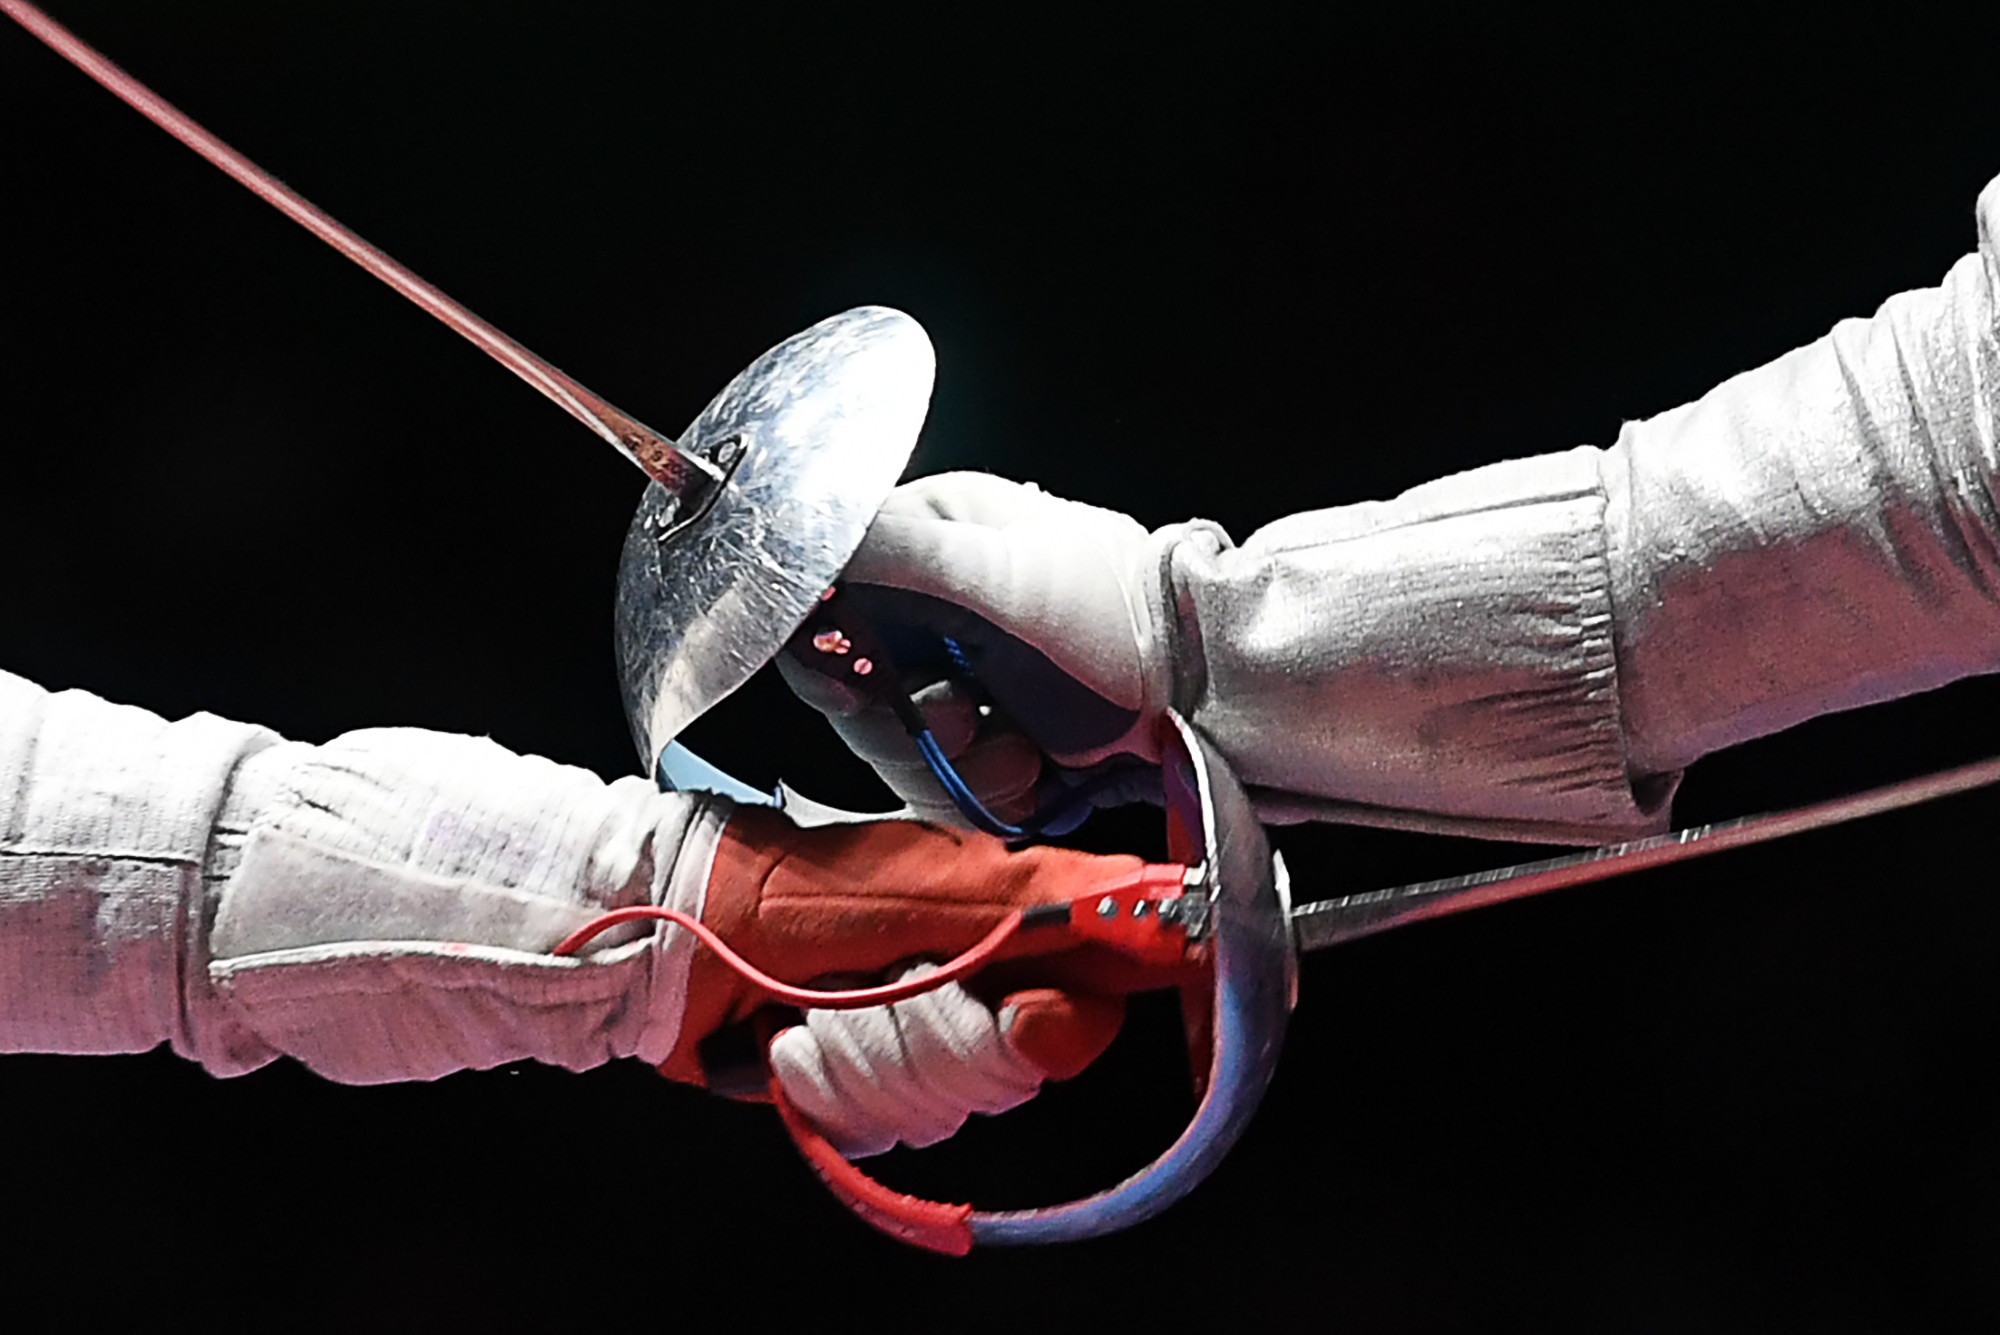 Italy and France took gold medals on the last day of the European Fencing Championships ©Getty Images